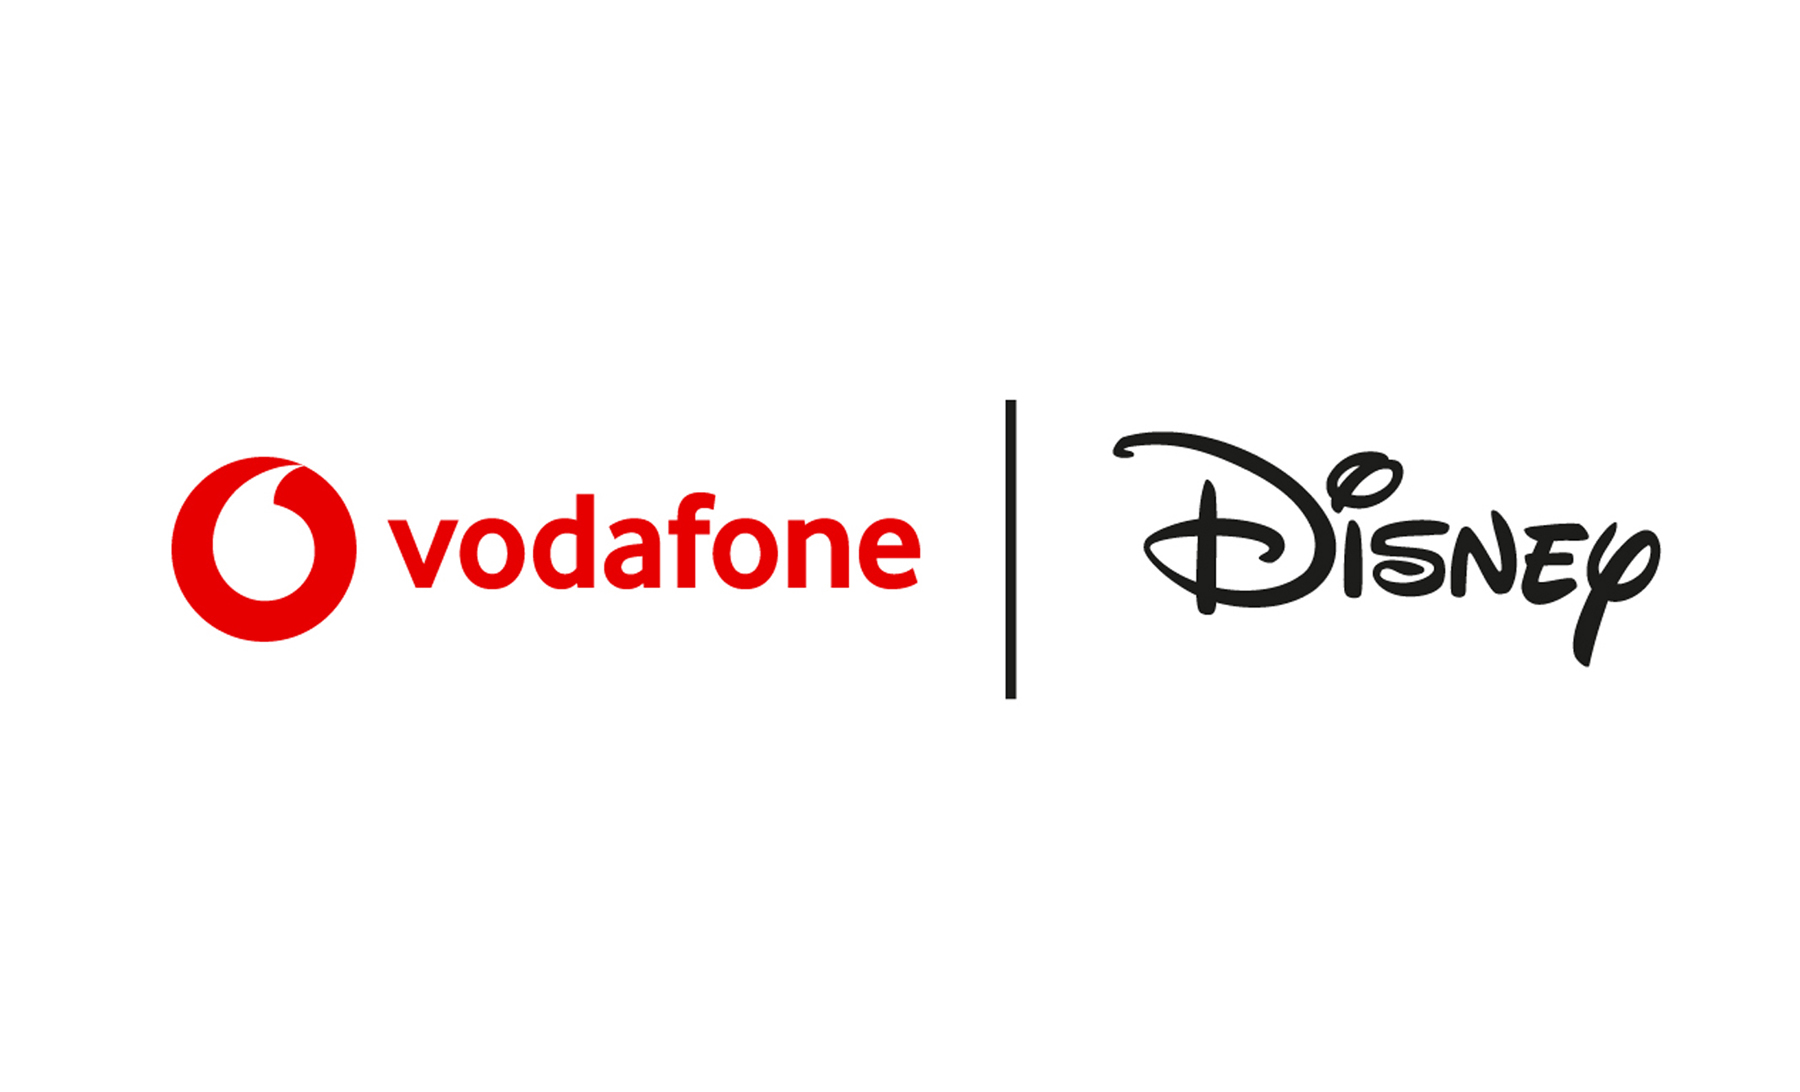 an image showing both the Vodafone and Disney logos